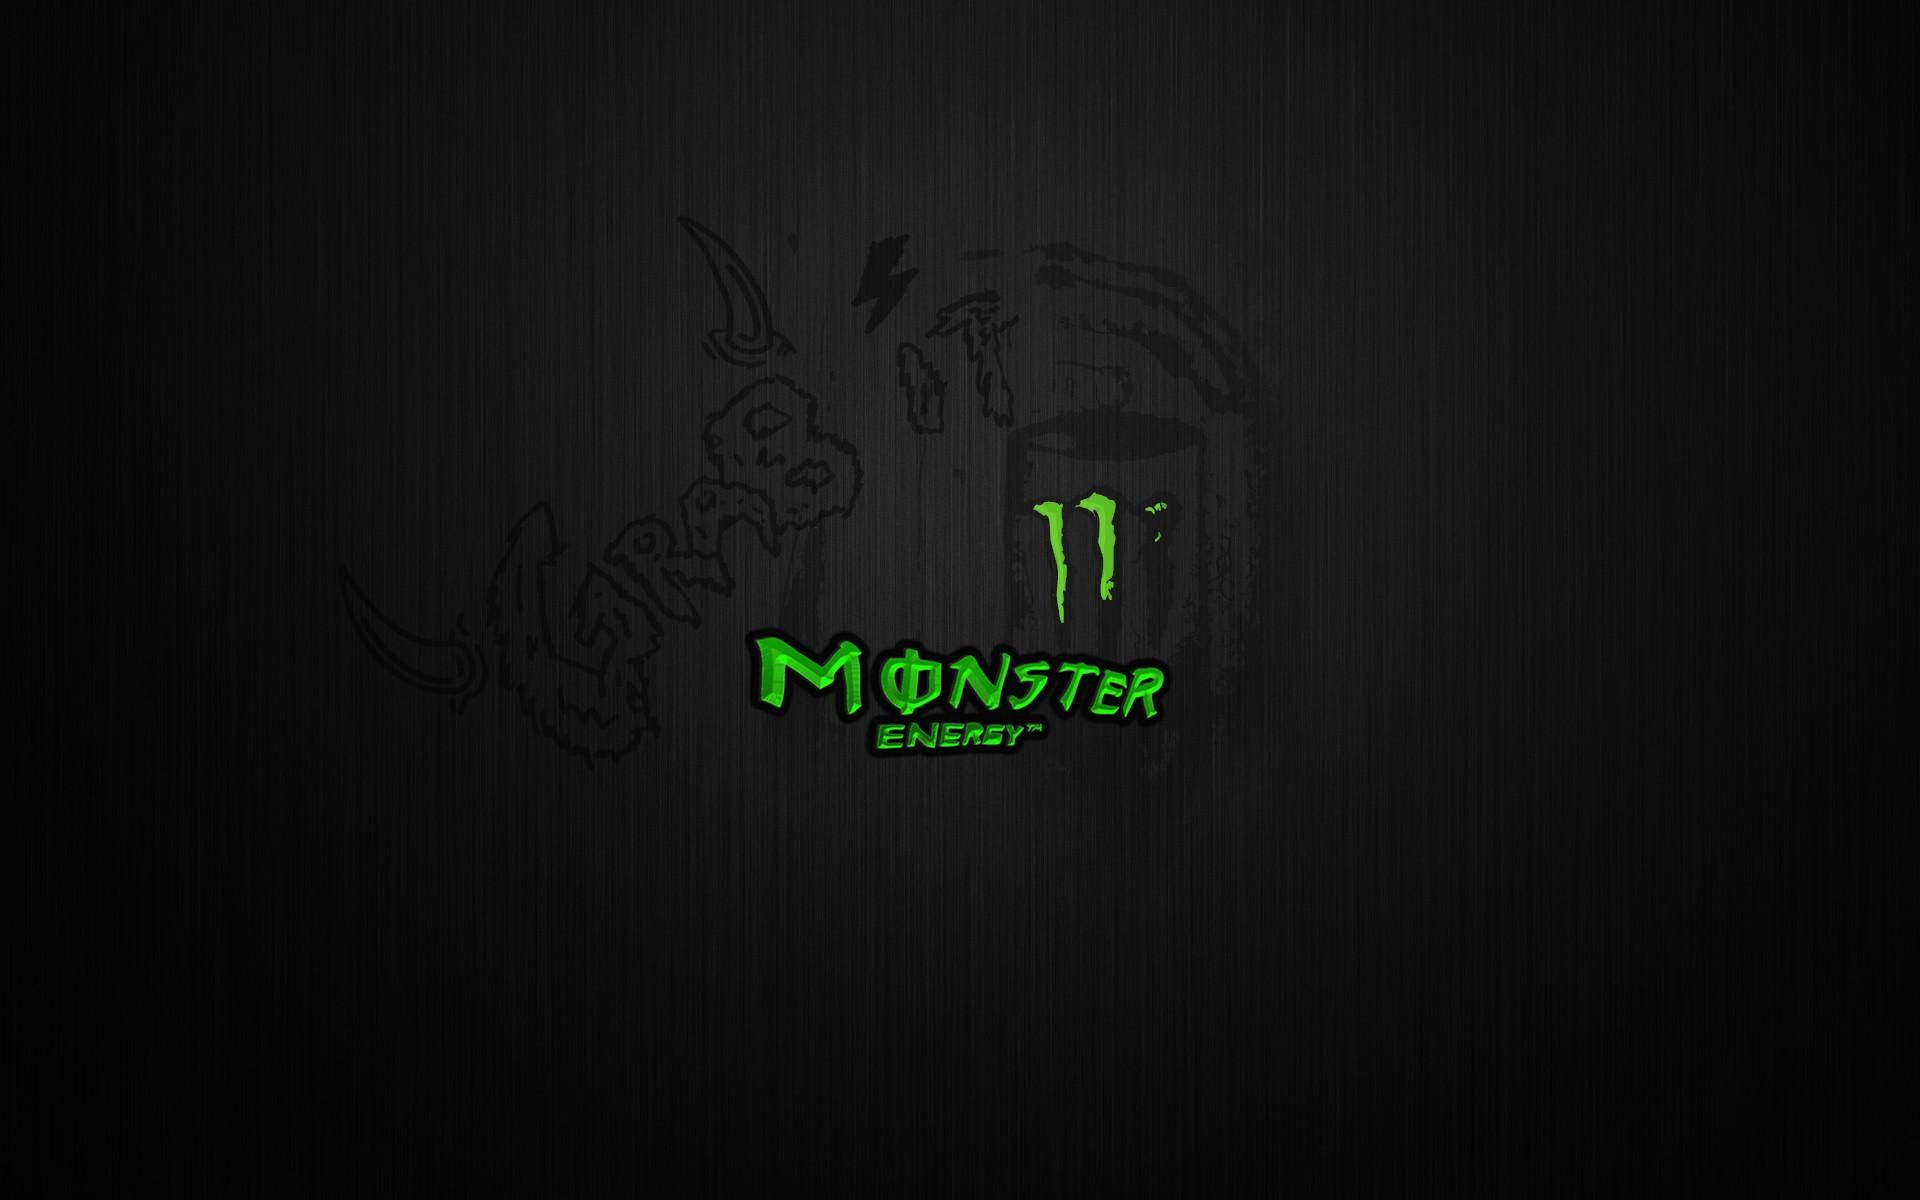 Monster Energy Wallpapers Full Hd Wallpaper Search Page 2 | HD ...